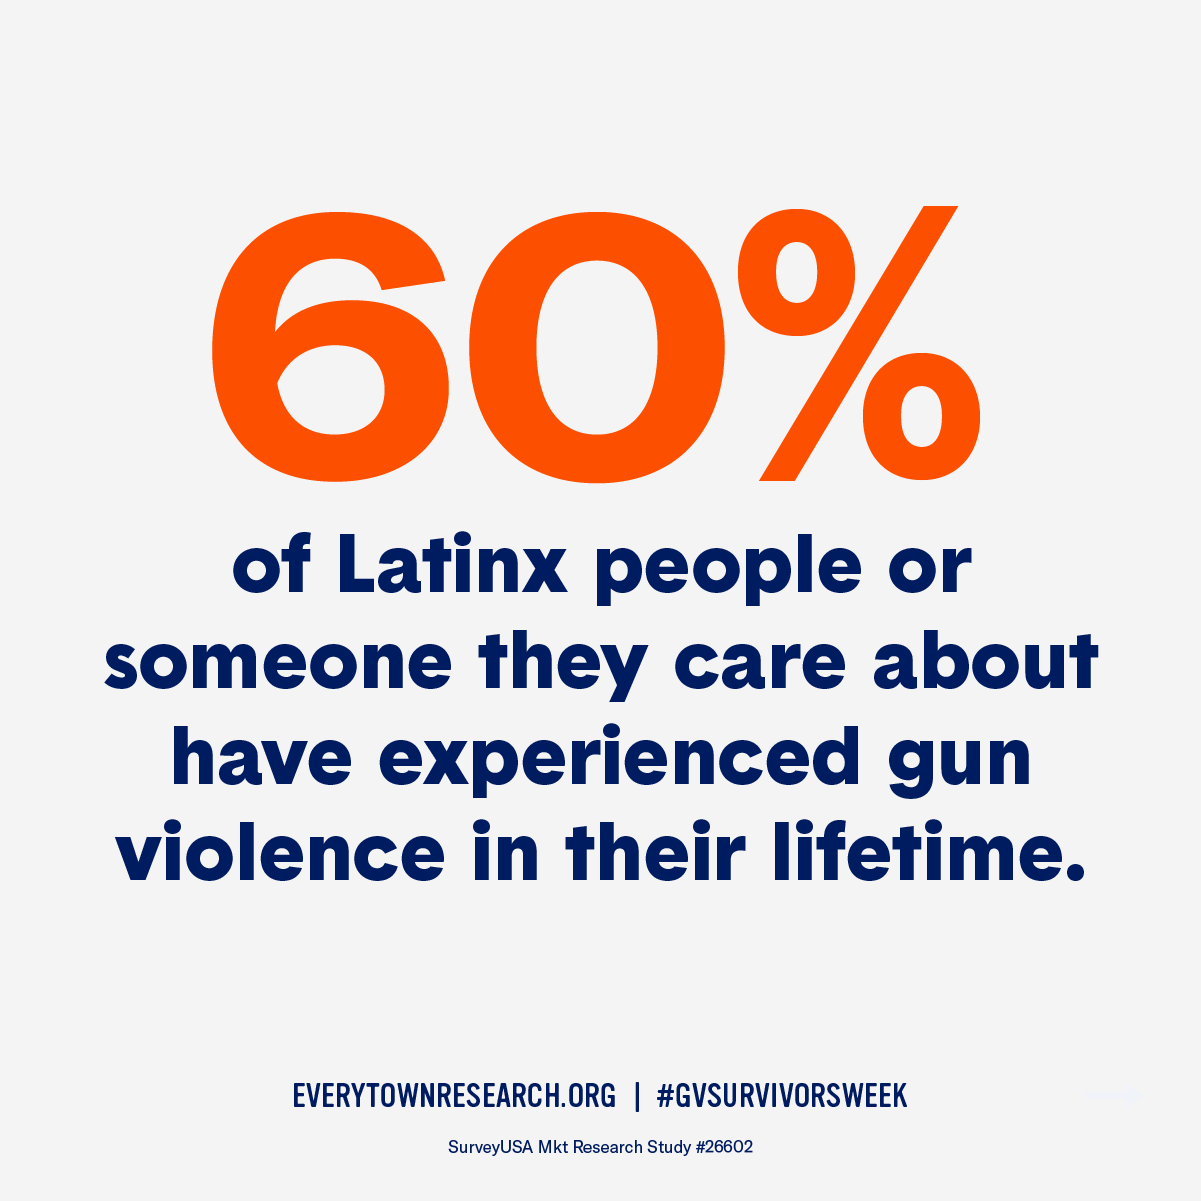 60% of Latinx people or someone they care about have experienced gun violence in their lifetime.